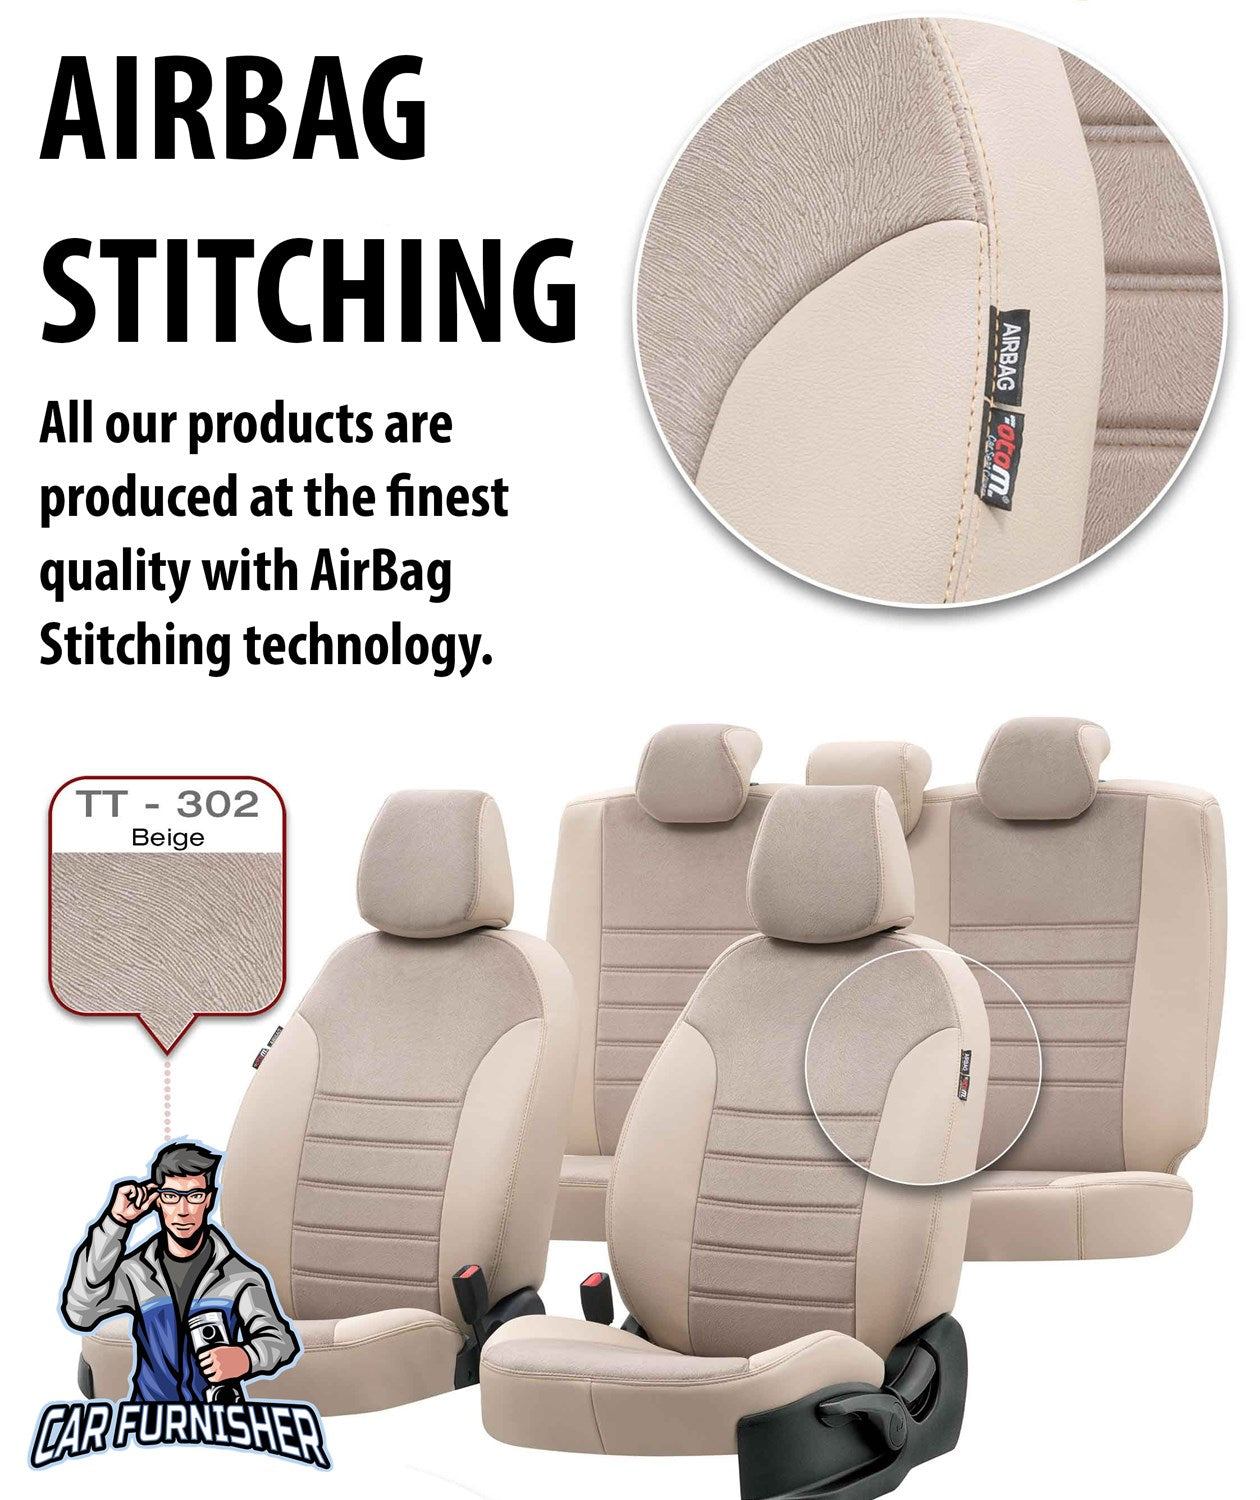 Citroen Berlingo Seat Covers London Foal Feather Design Smoked Black Leather & Foal Feather